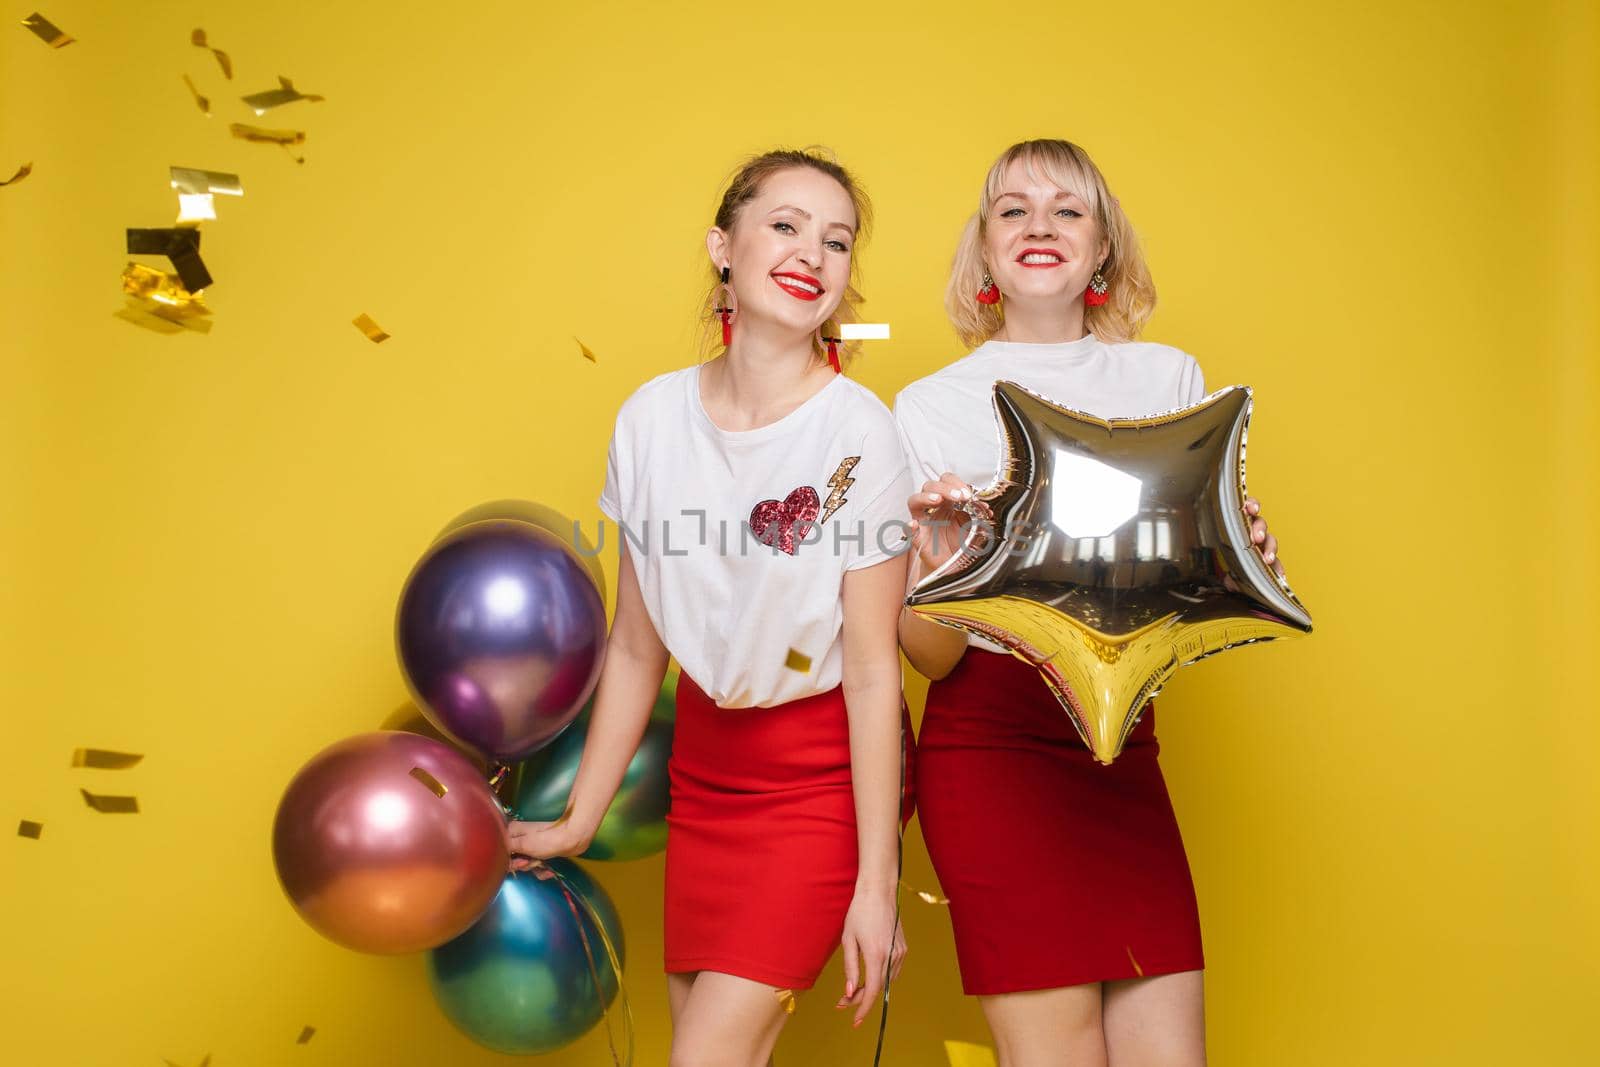 Two happy beautiful woman friend celebrating posing surrounded by colorful air balloon confetti by StudioLucky